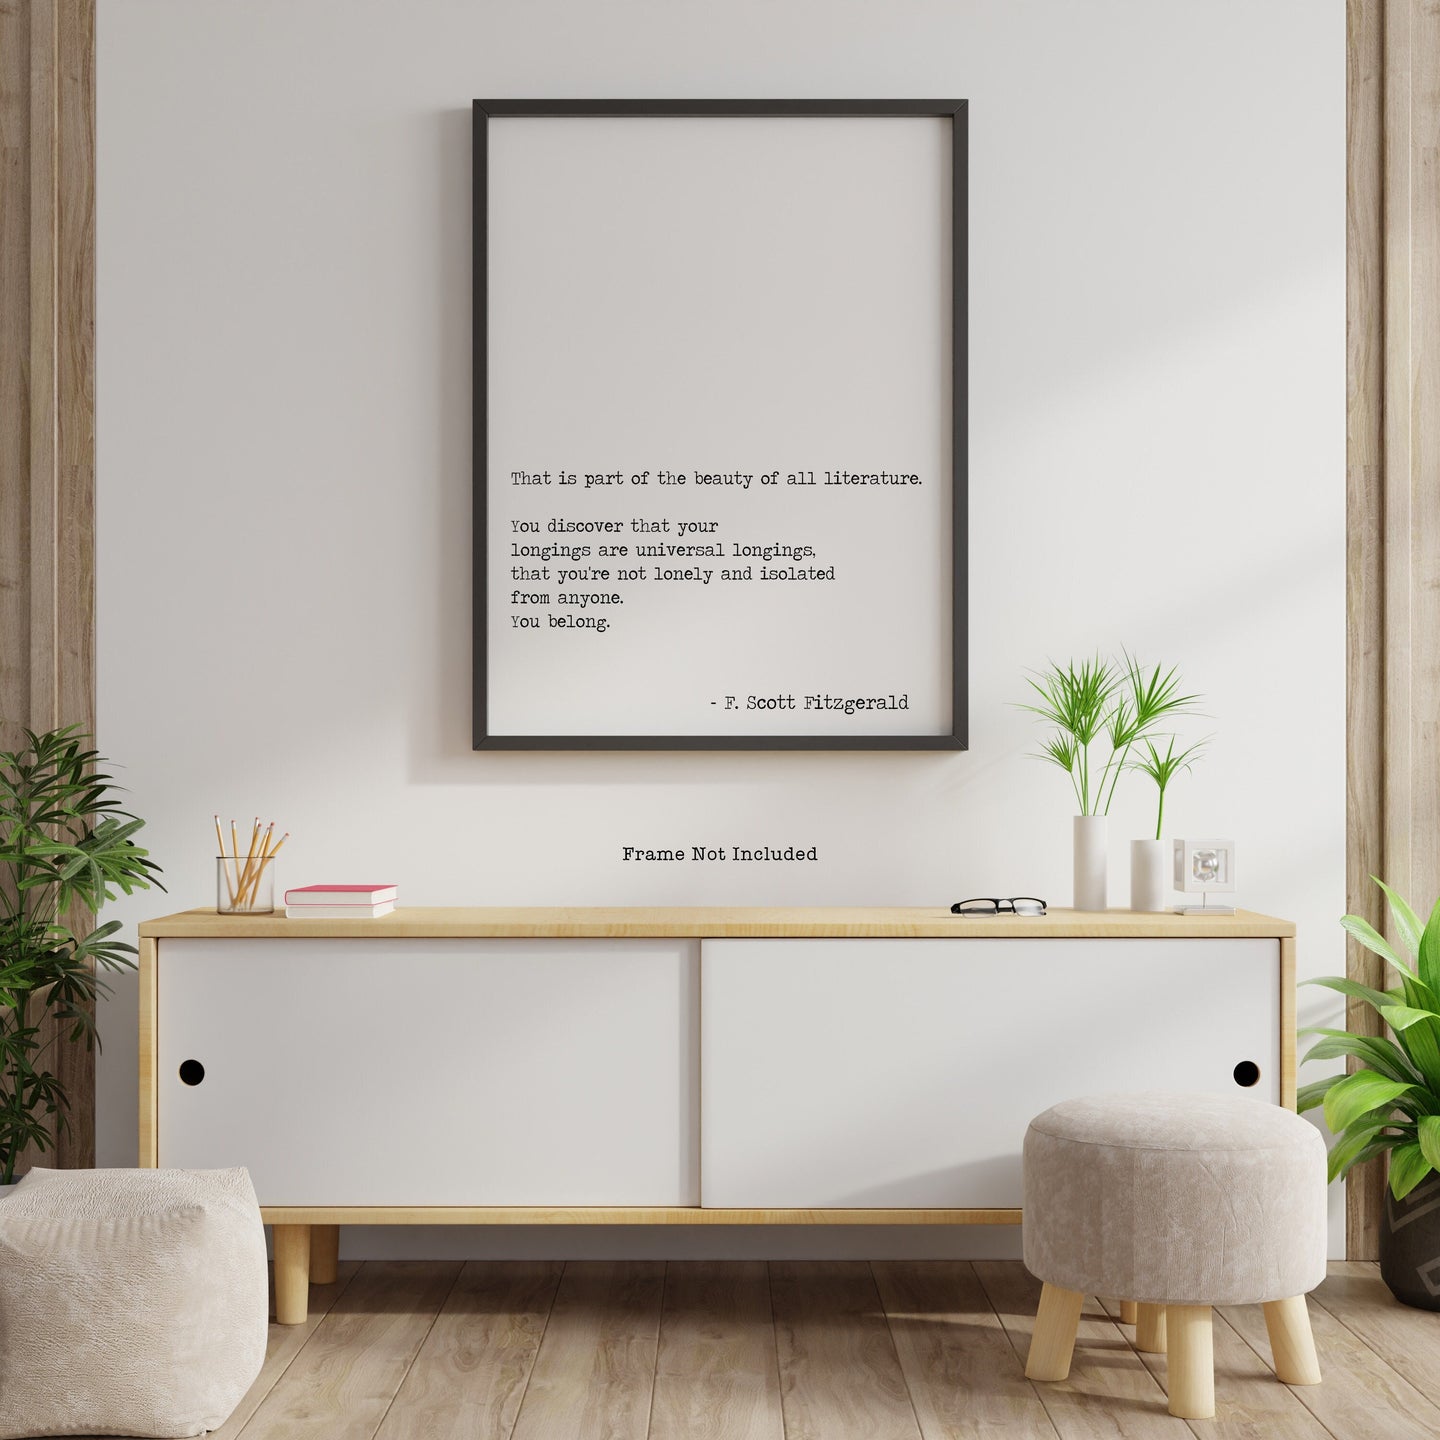 F Scott Fitzgerald Quote - The beauty of all literature, universal longings, UNFRAMED book quote print